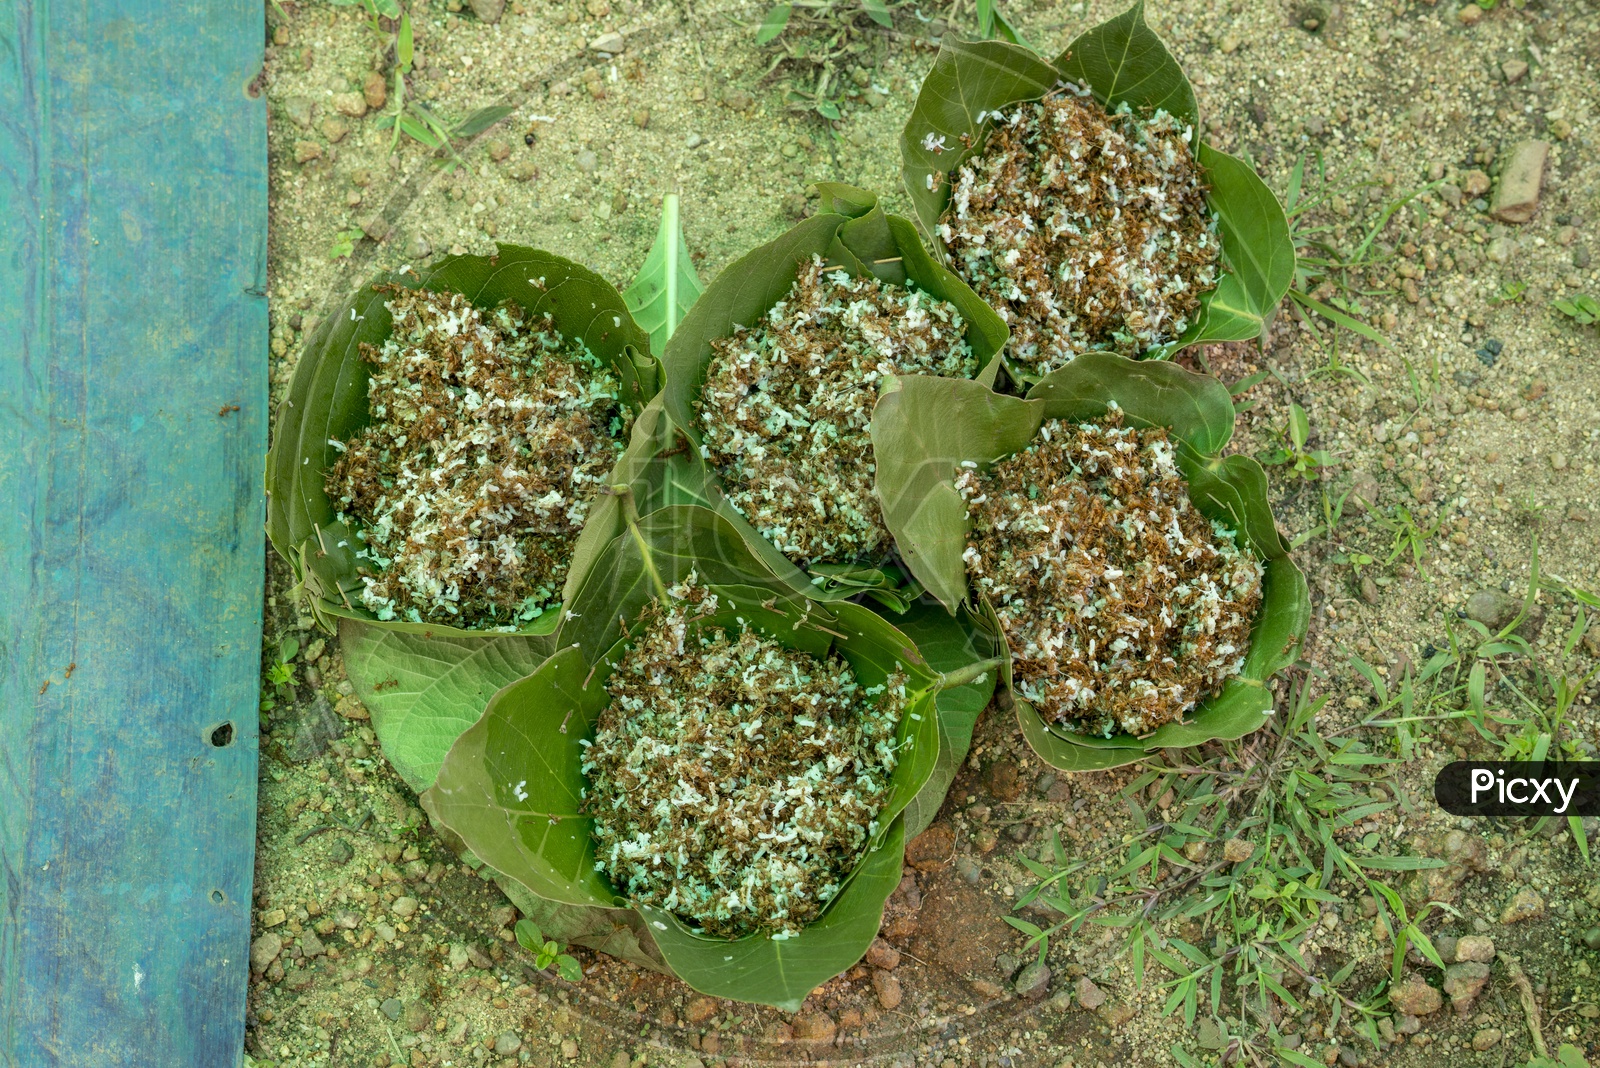 Tribal Food - Mostly Ants